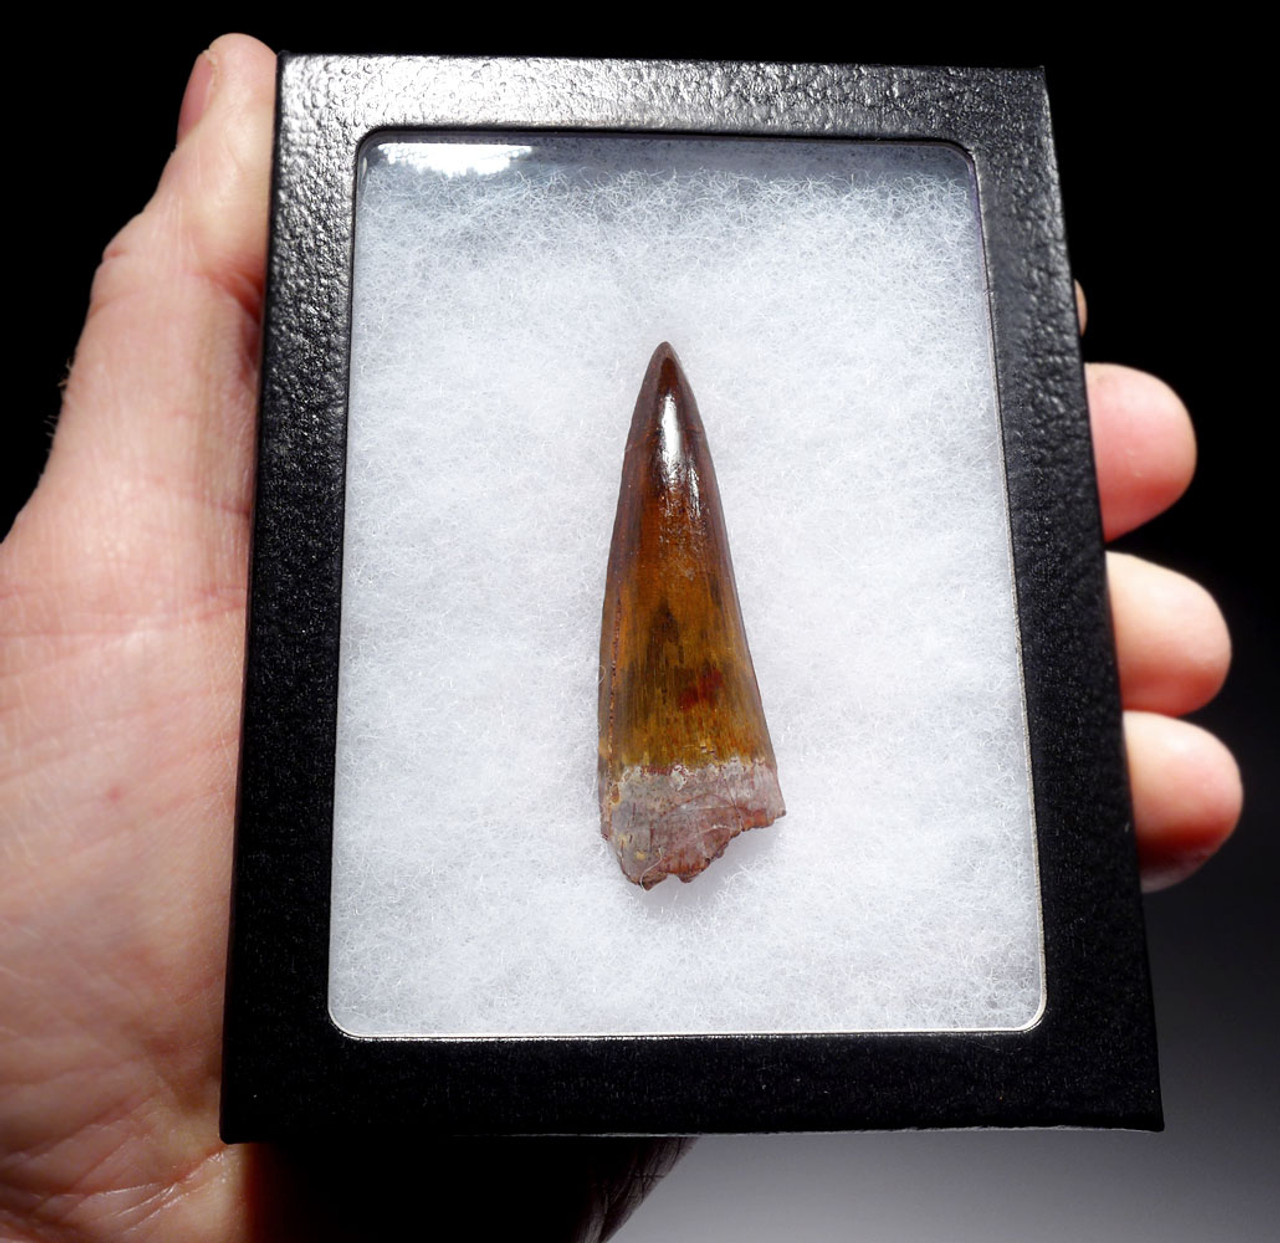 INCREDIBLE FINEST 2.25 INCH SPINOSAURUS DINOSAUR FOSSIL TOOTH  *DT5-506